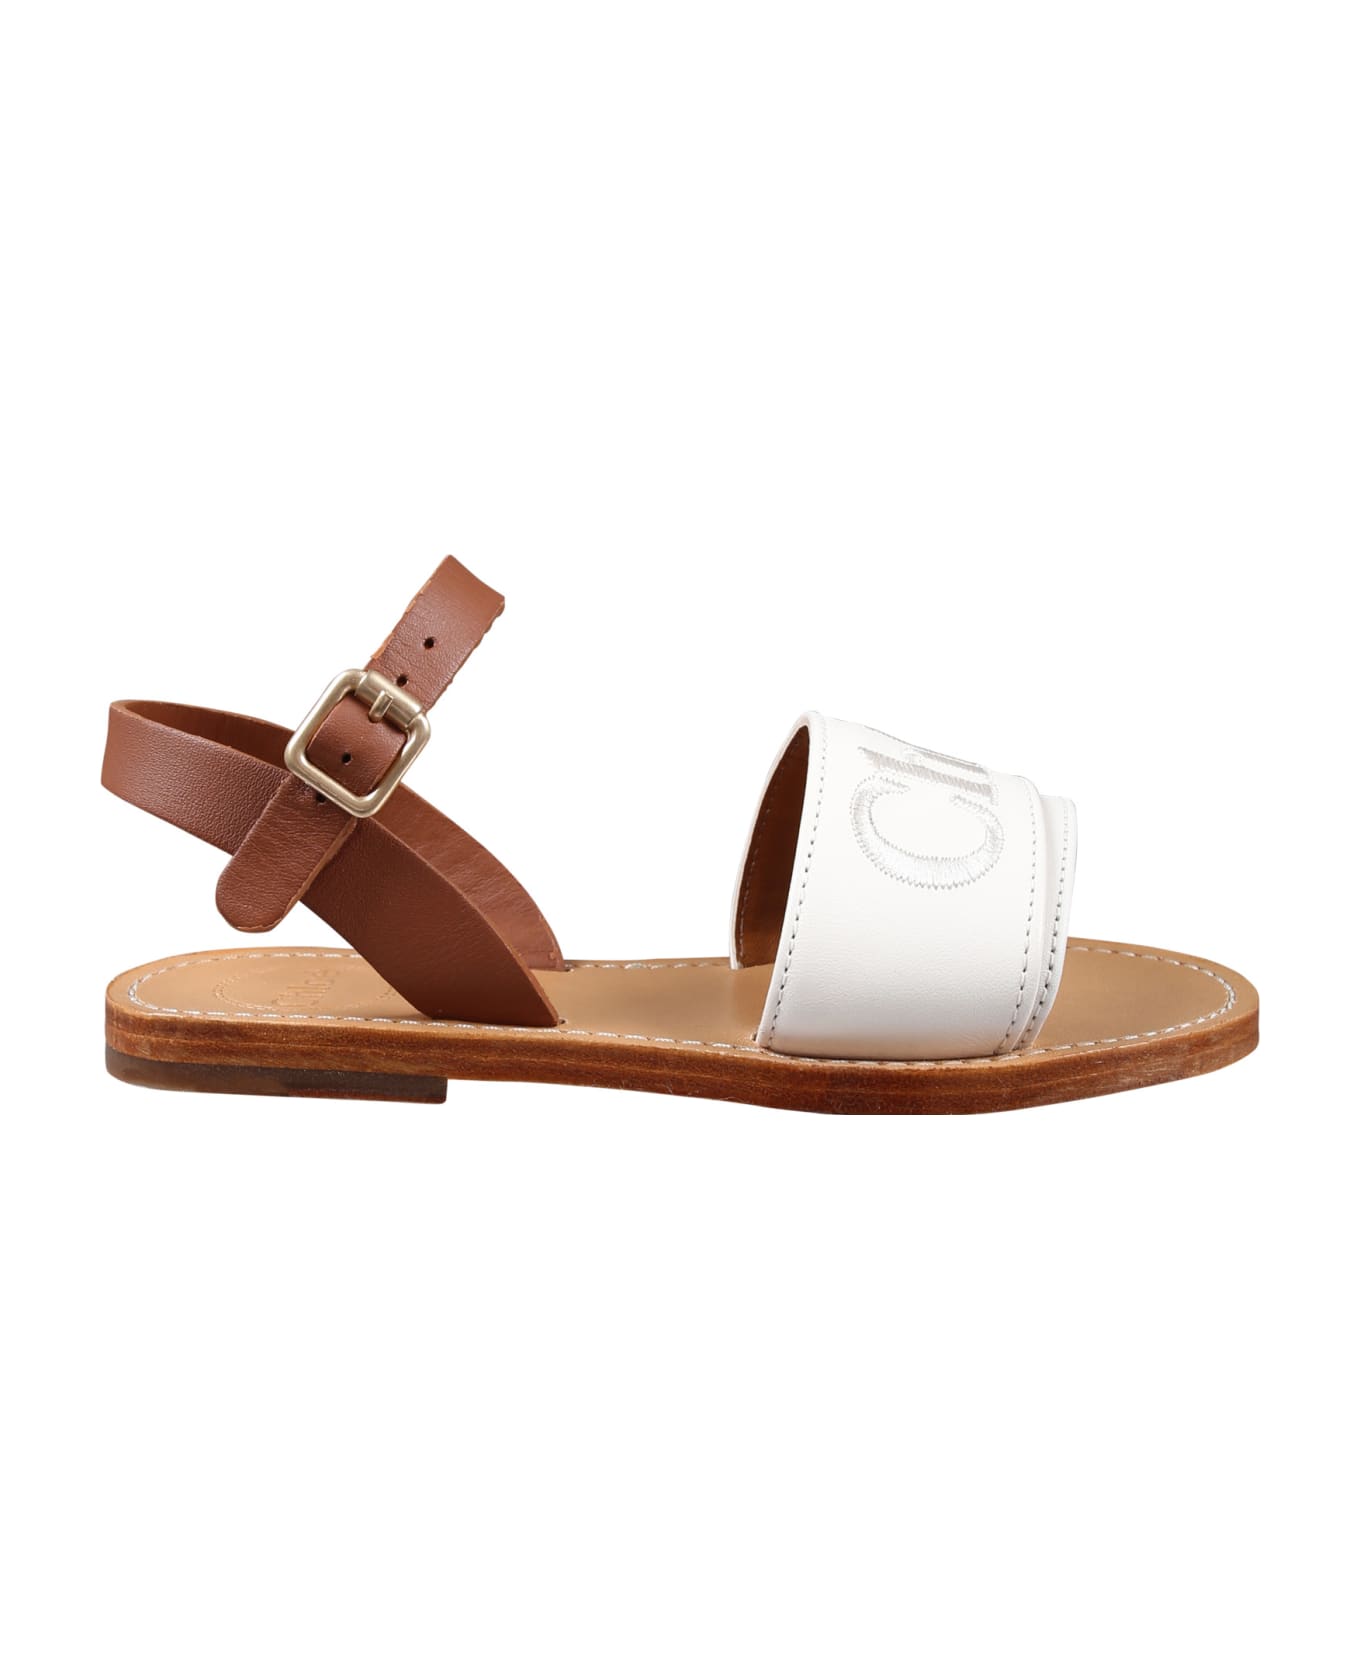 Chloé Ivory Sandals For Girl With Logo - Ivory シューズ